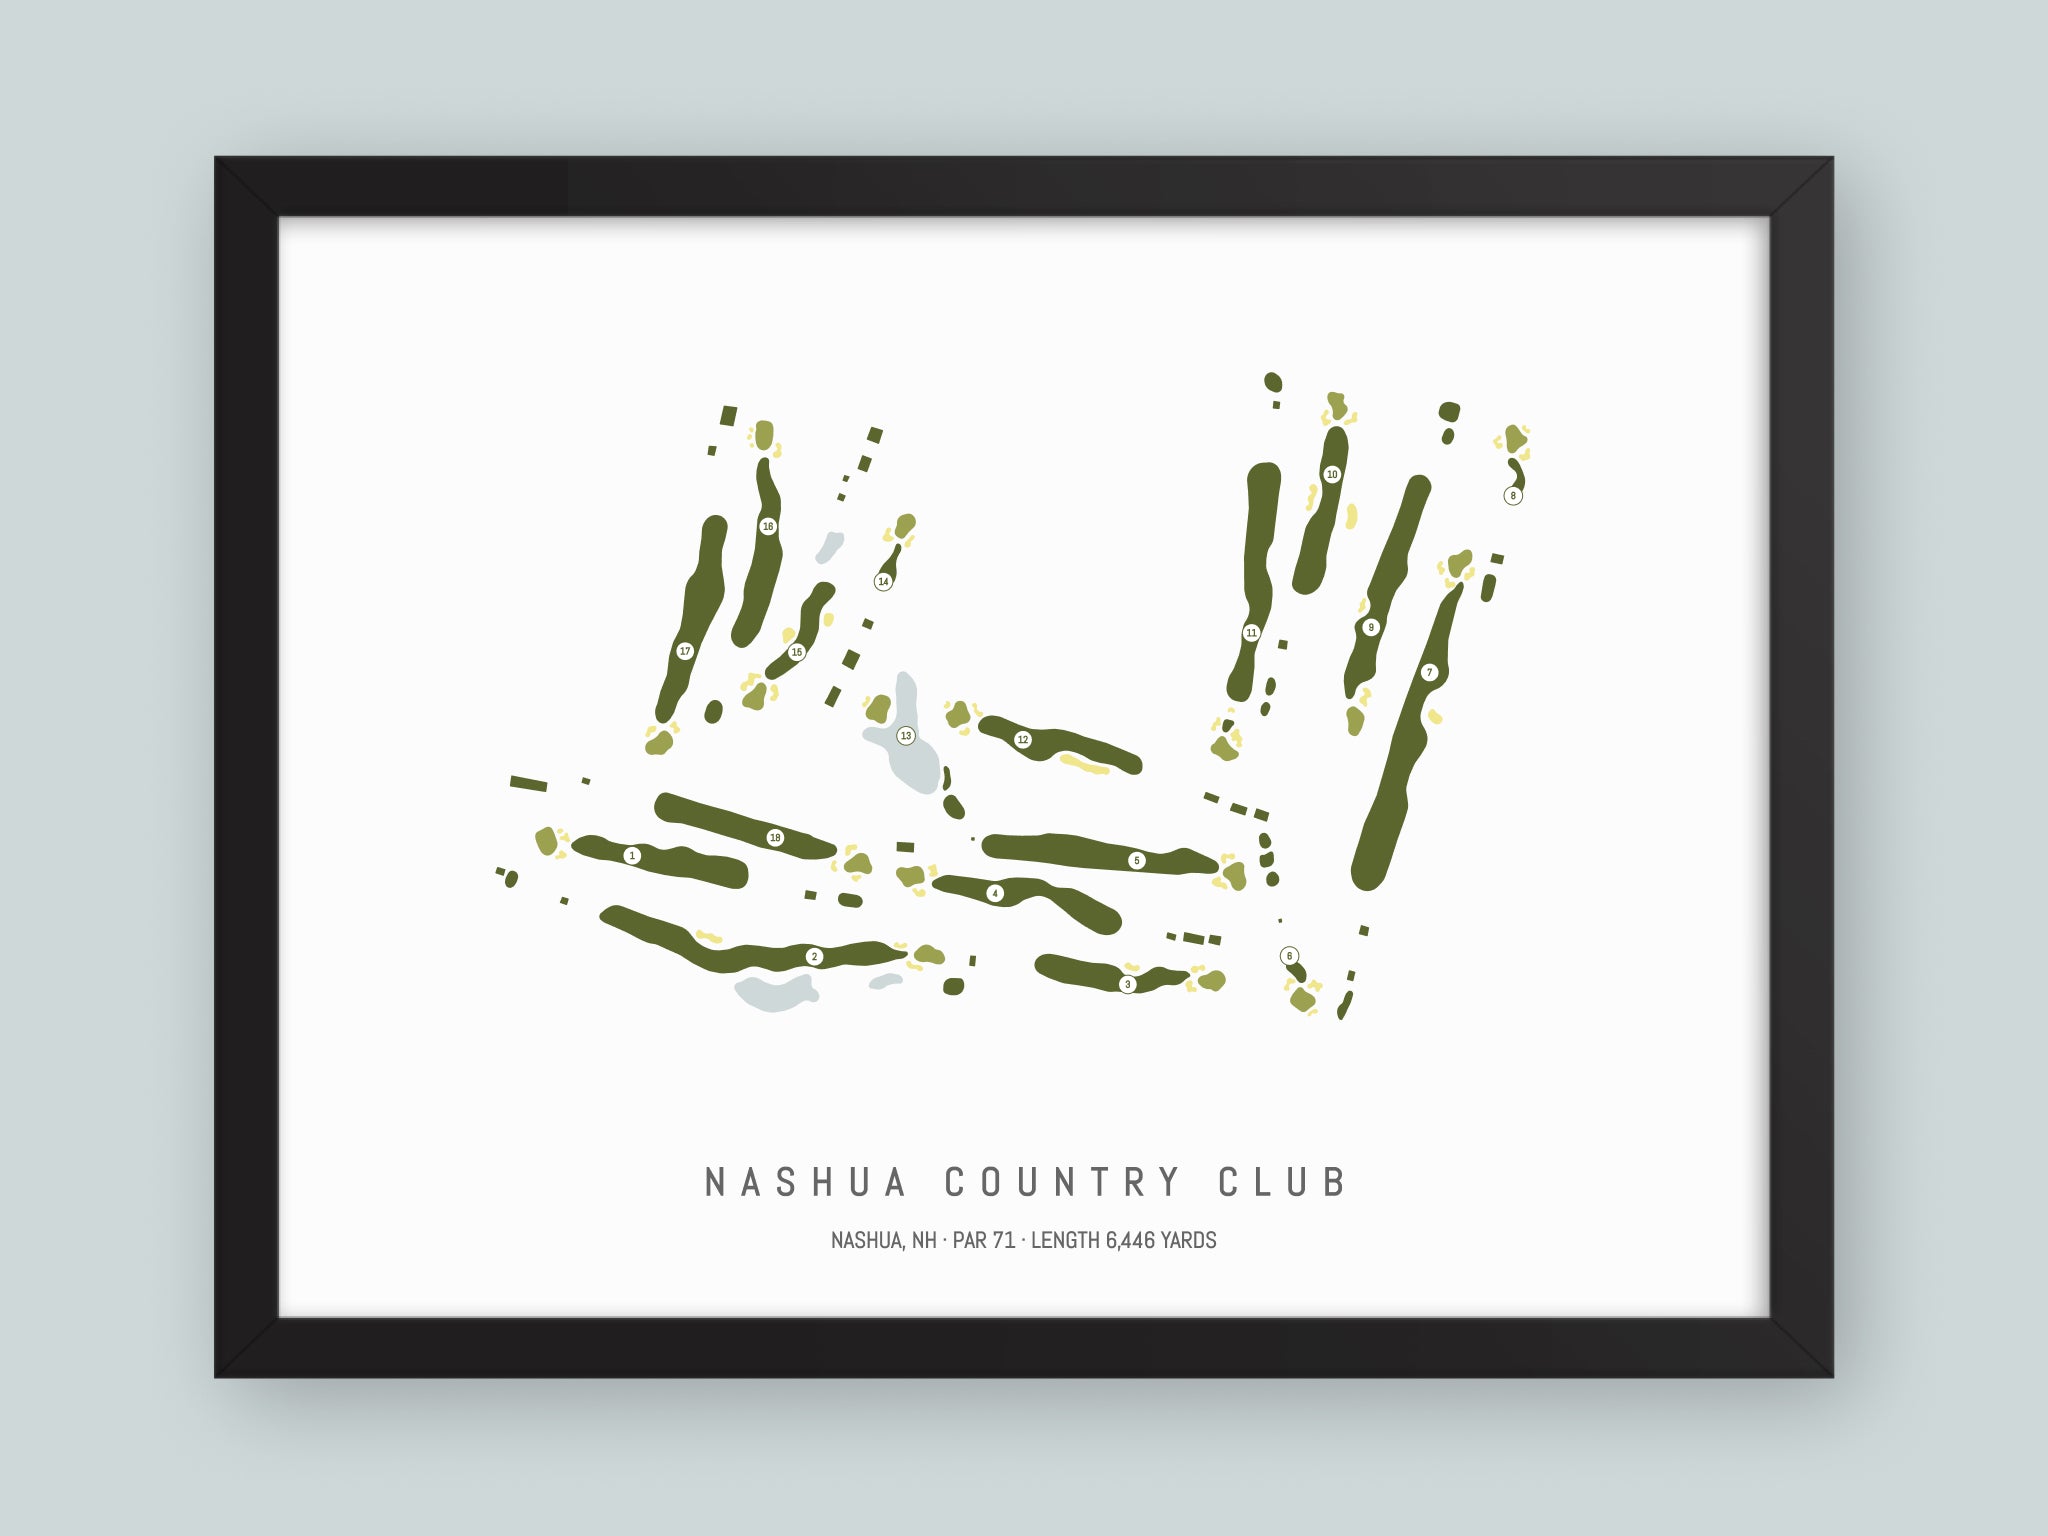 Nashua-Country-Club-NH--Black-Frame-24x18-With-Hole-Numbers